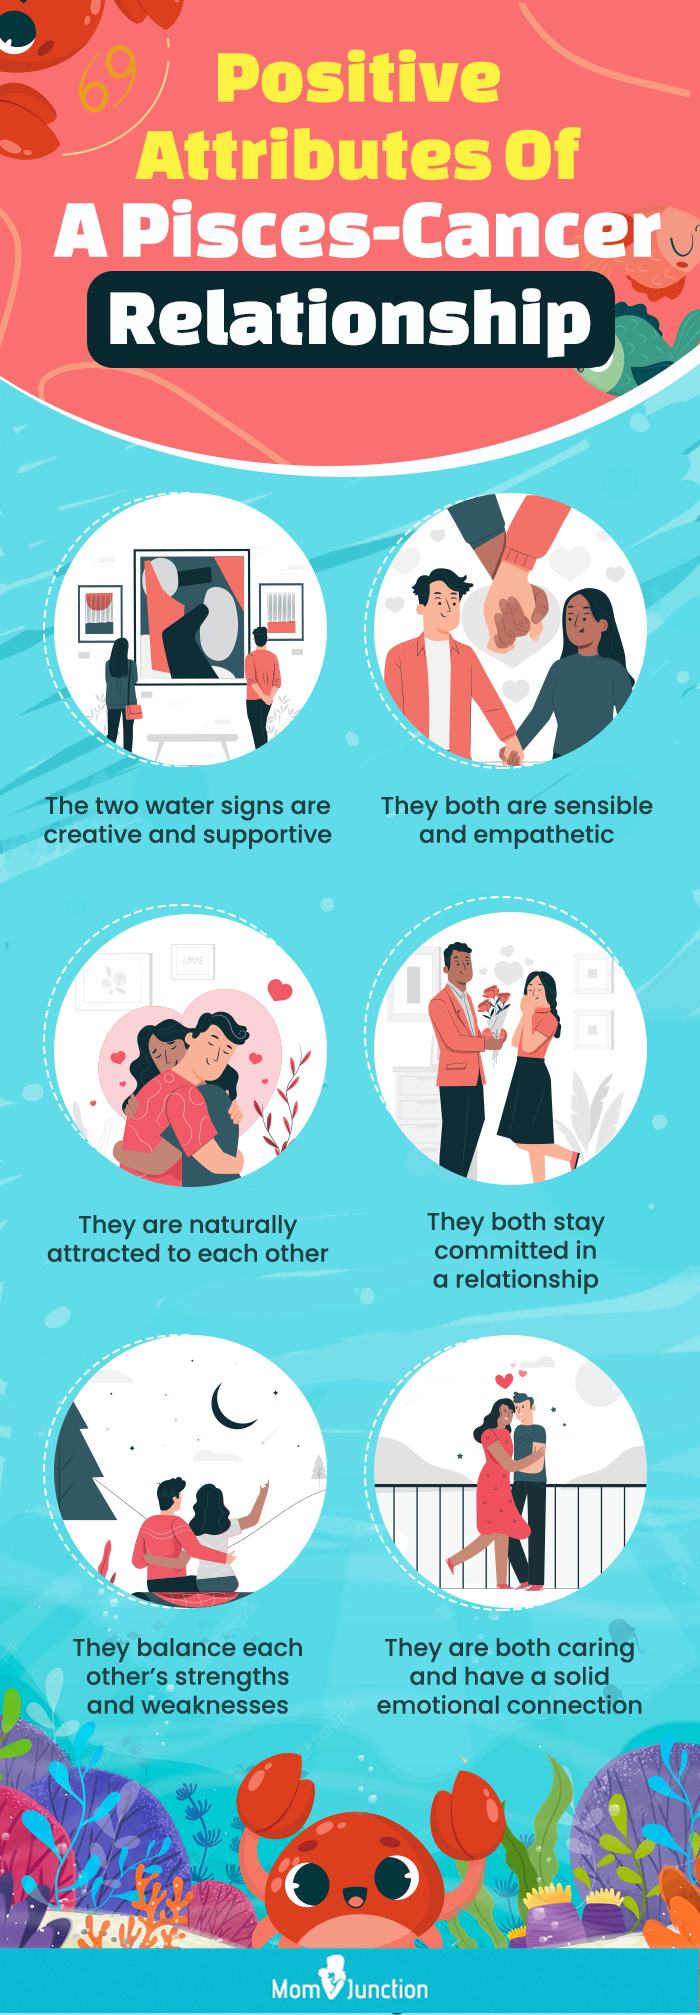 pisces and cancer reasons this match may work (infographic)